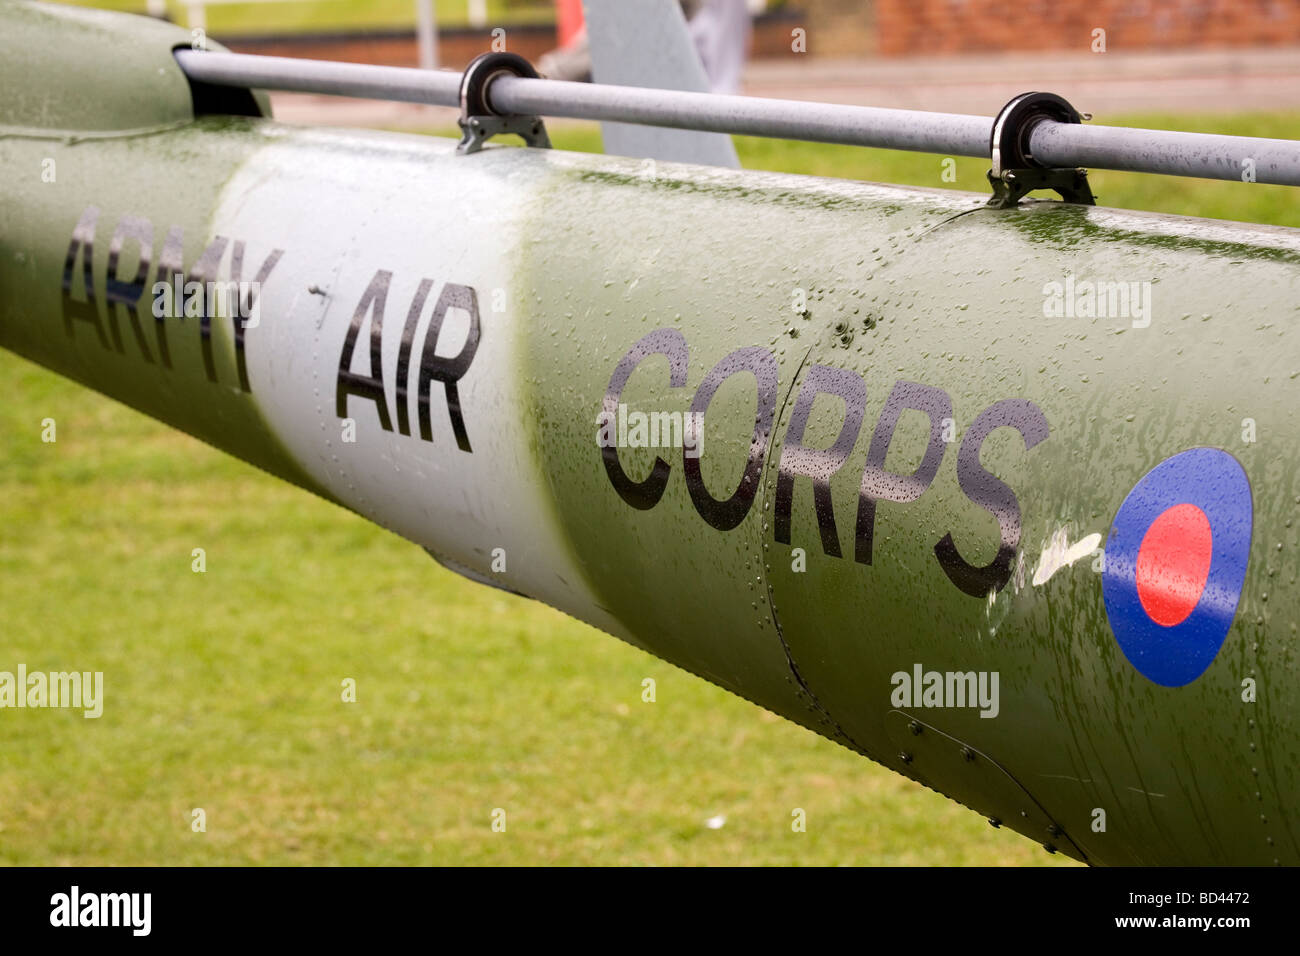 The tail of a British Army Air Corps helicopter. The helicopter is camouflaged in grey and green. Stock Photo